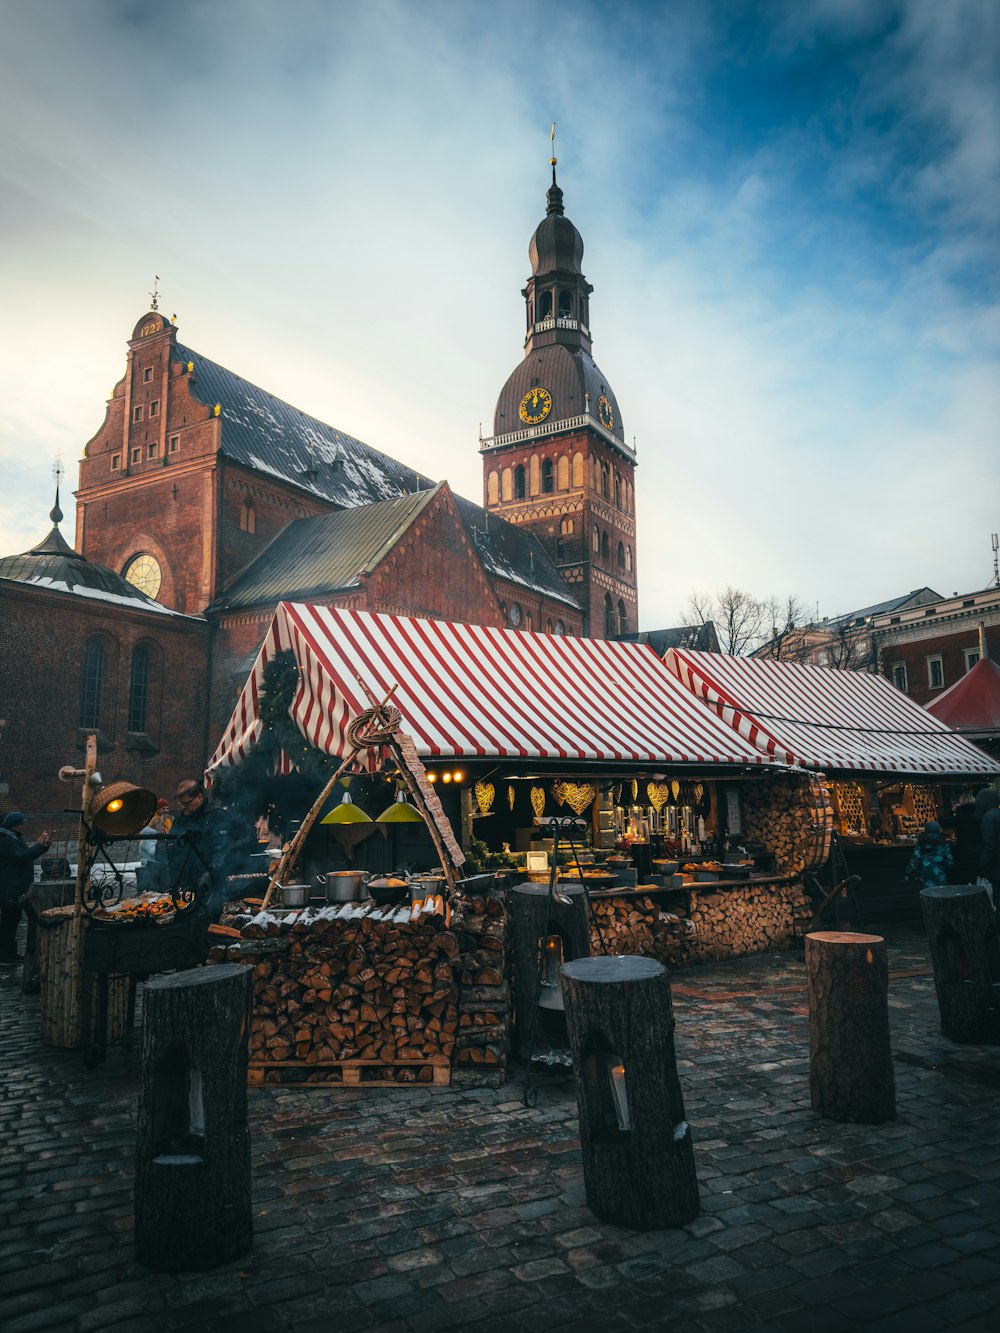 an outdoor market with a red and white awning